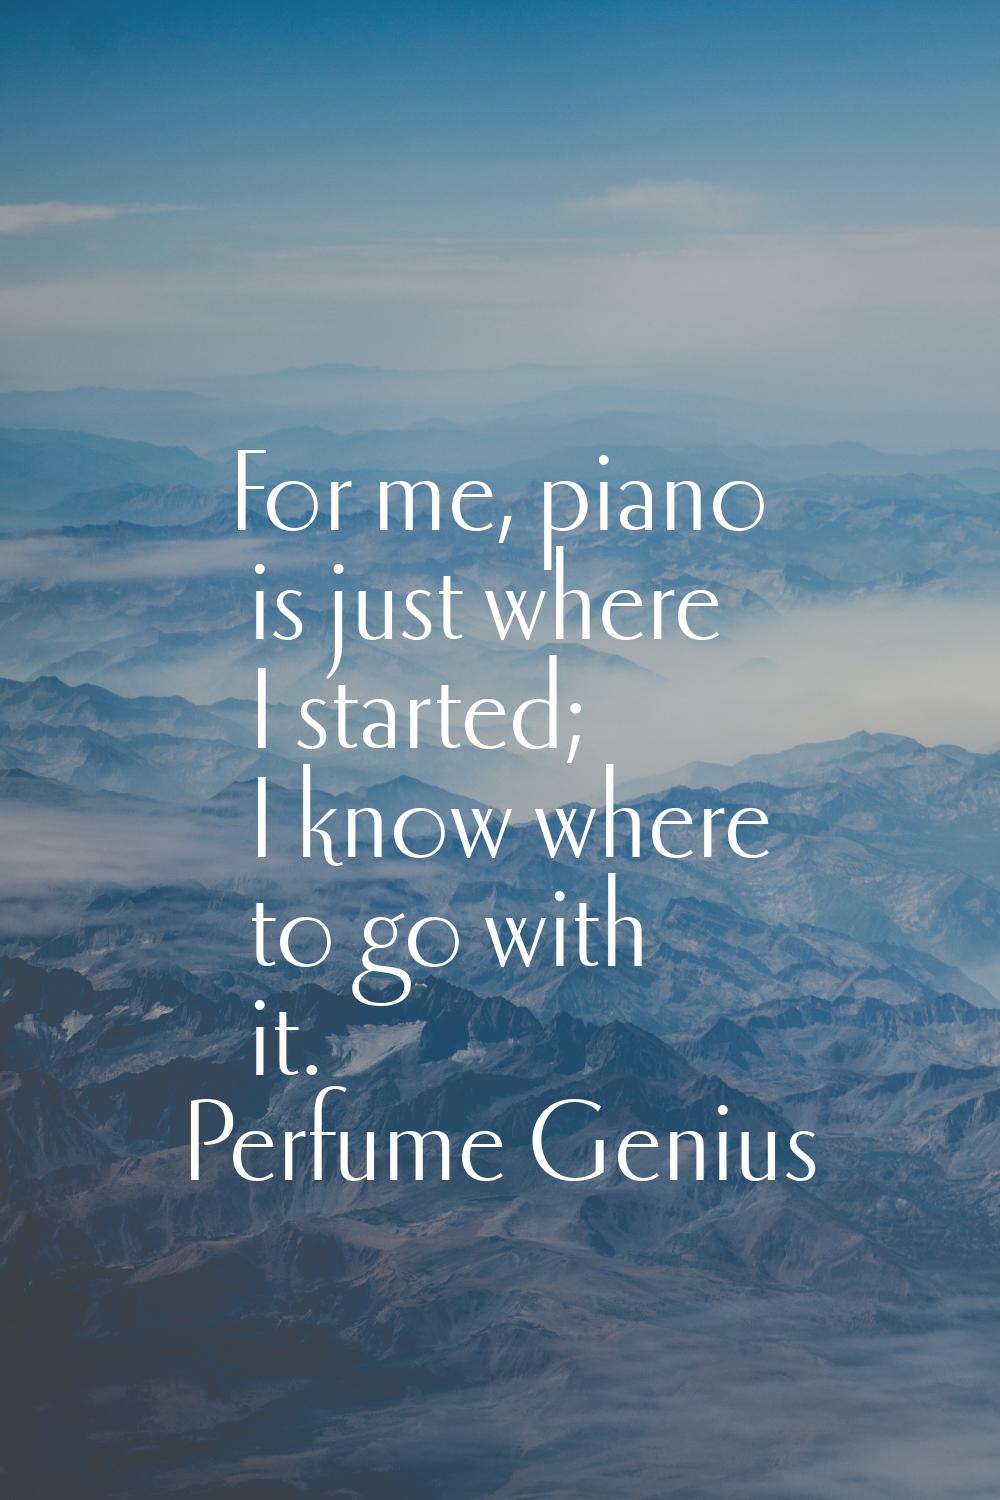 For me, piano is just where I started; I know where to go with it.